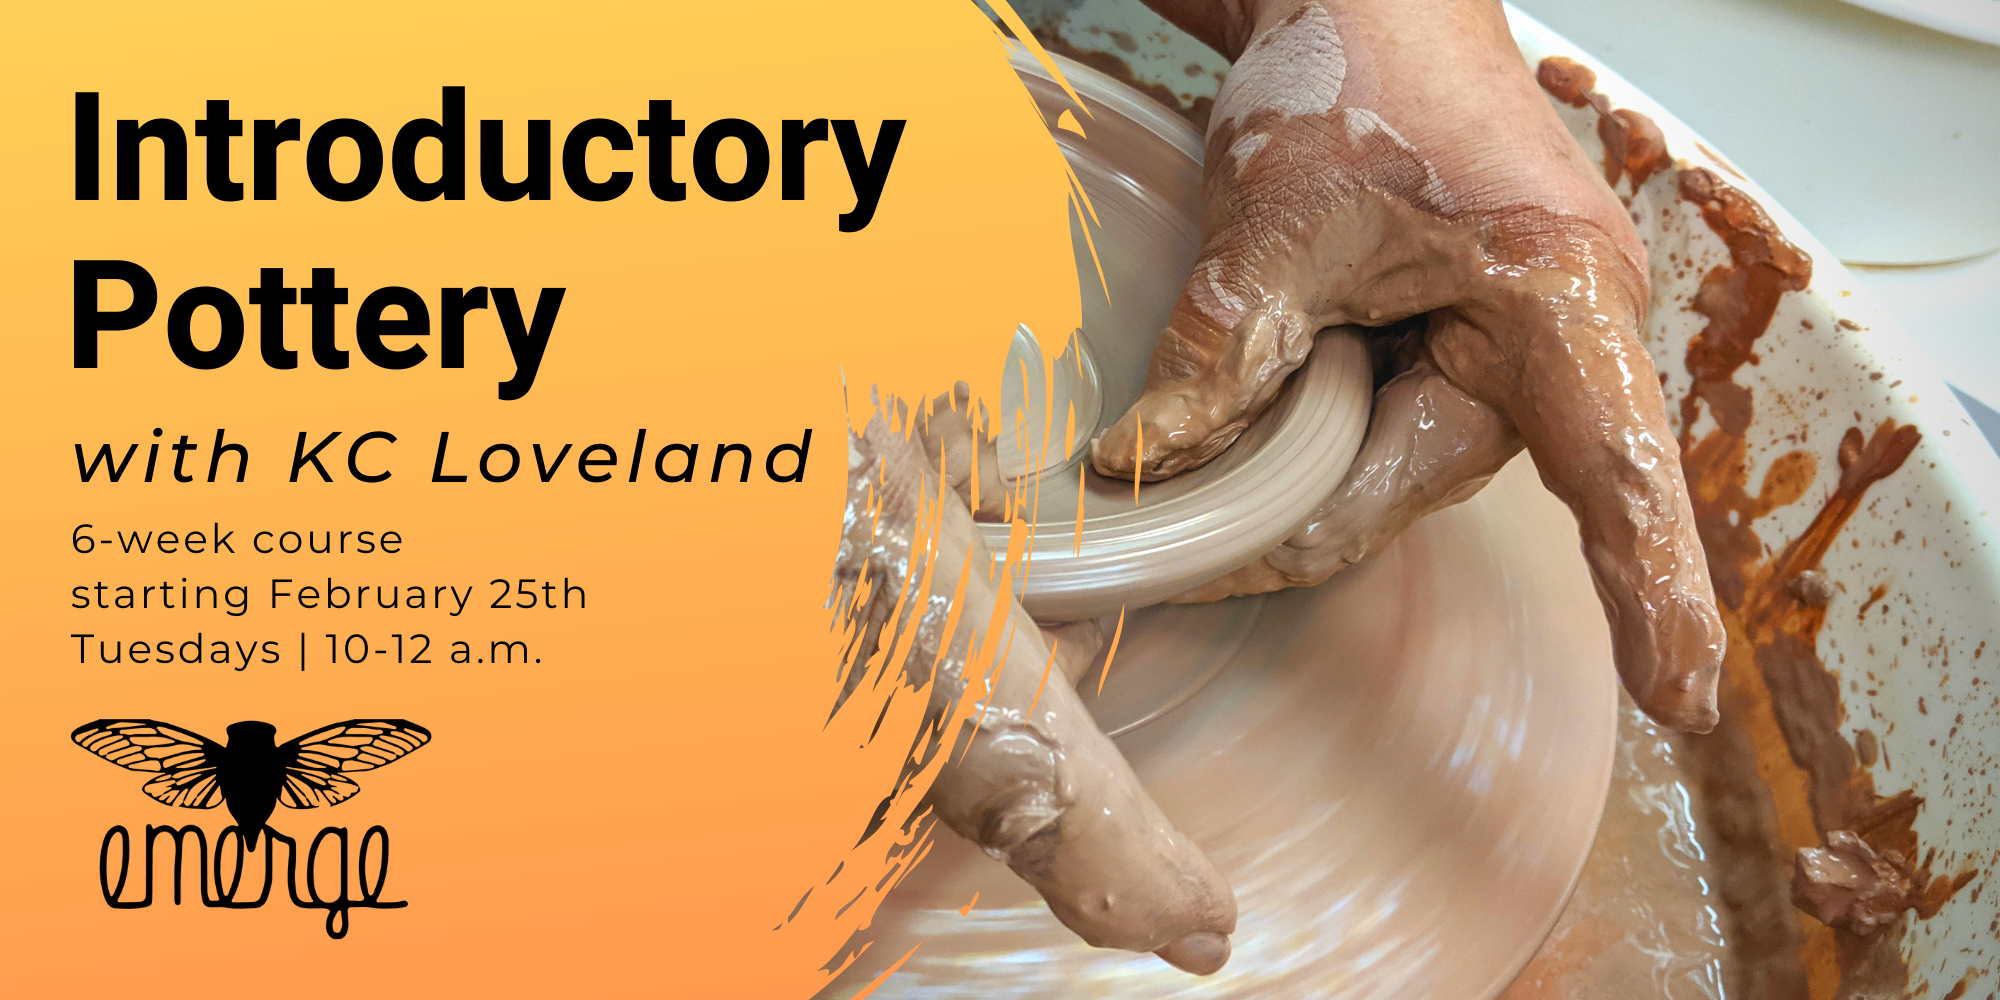 Introductory Pottery with KC Loveland: Tuesday AM